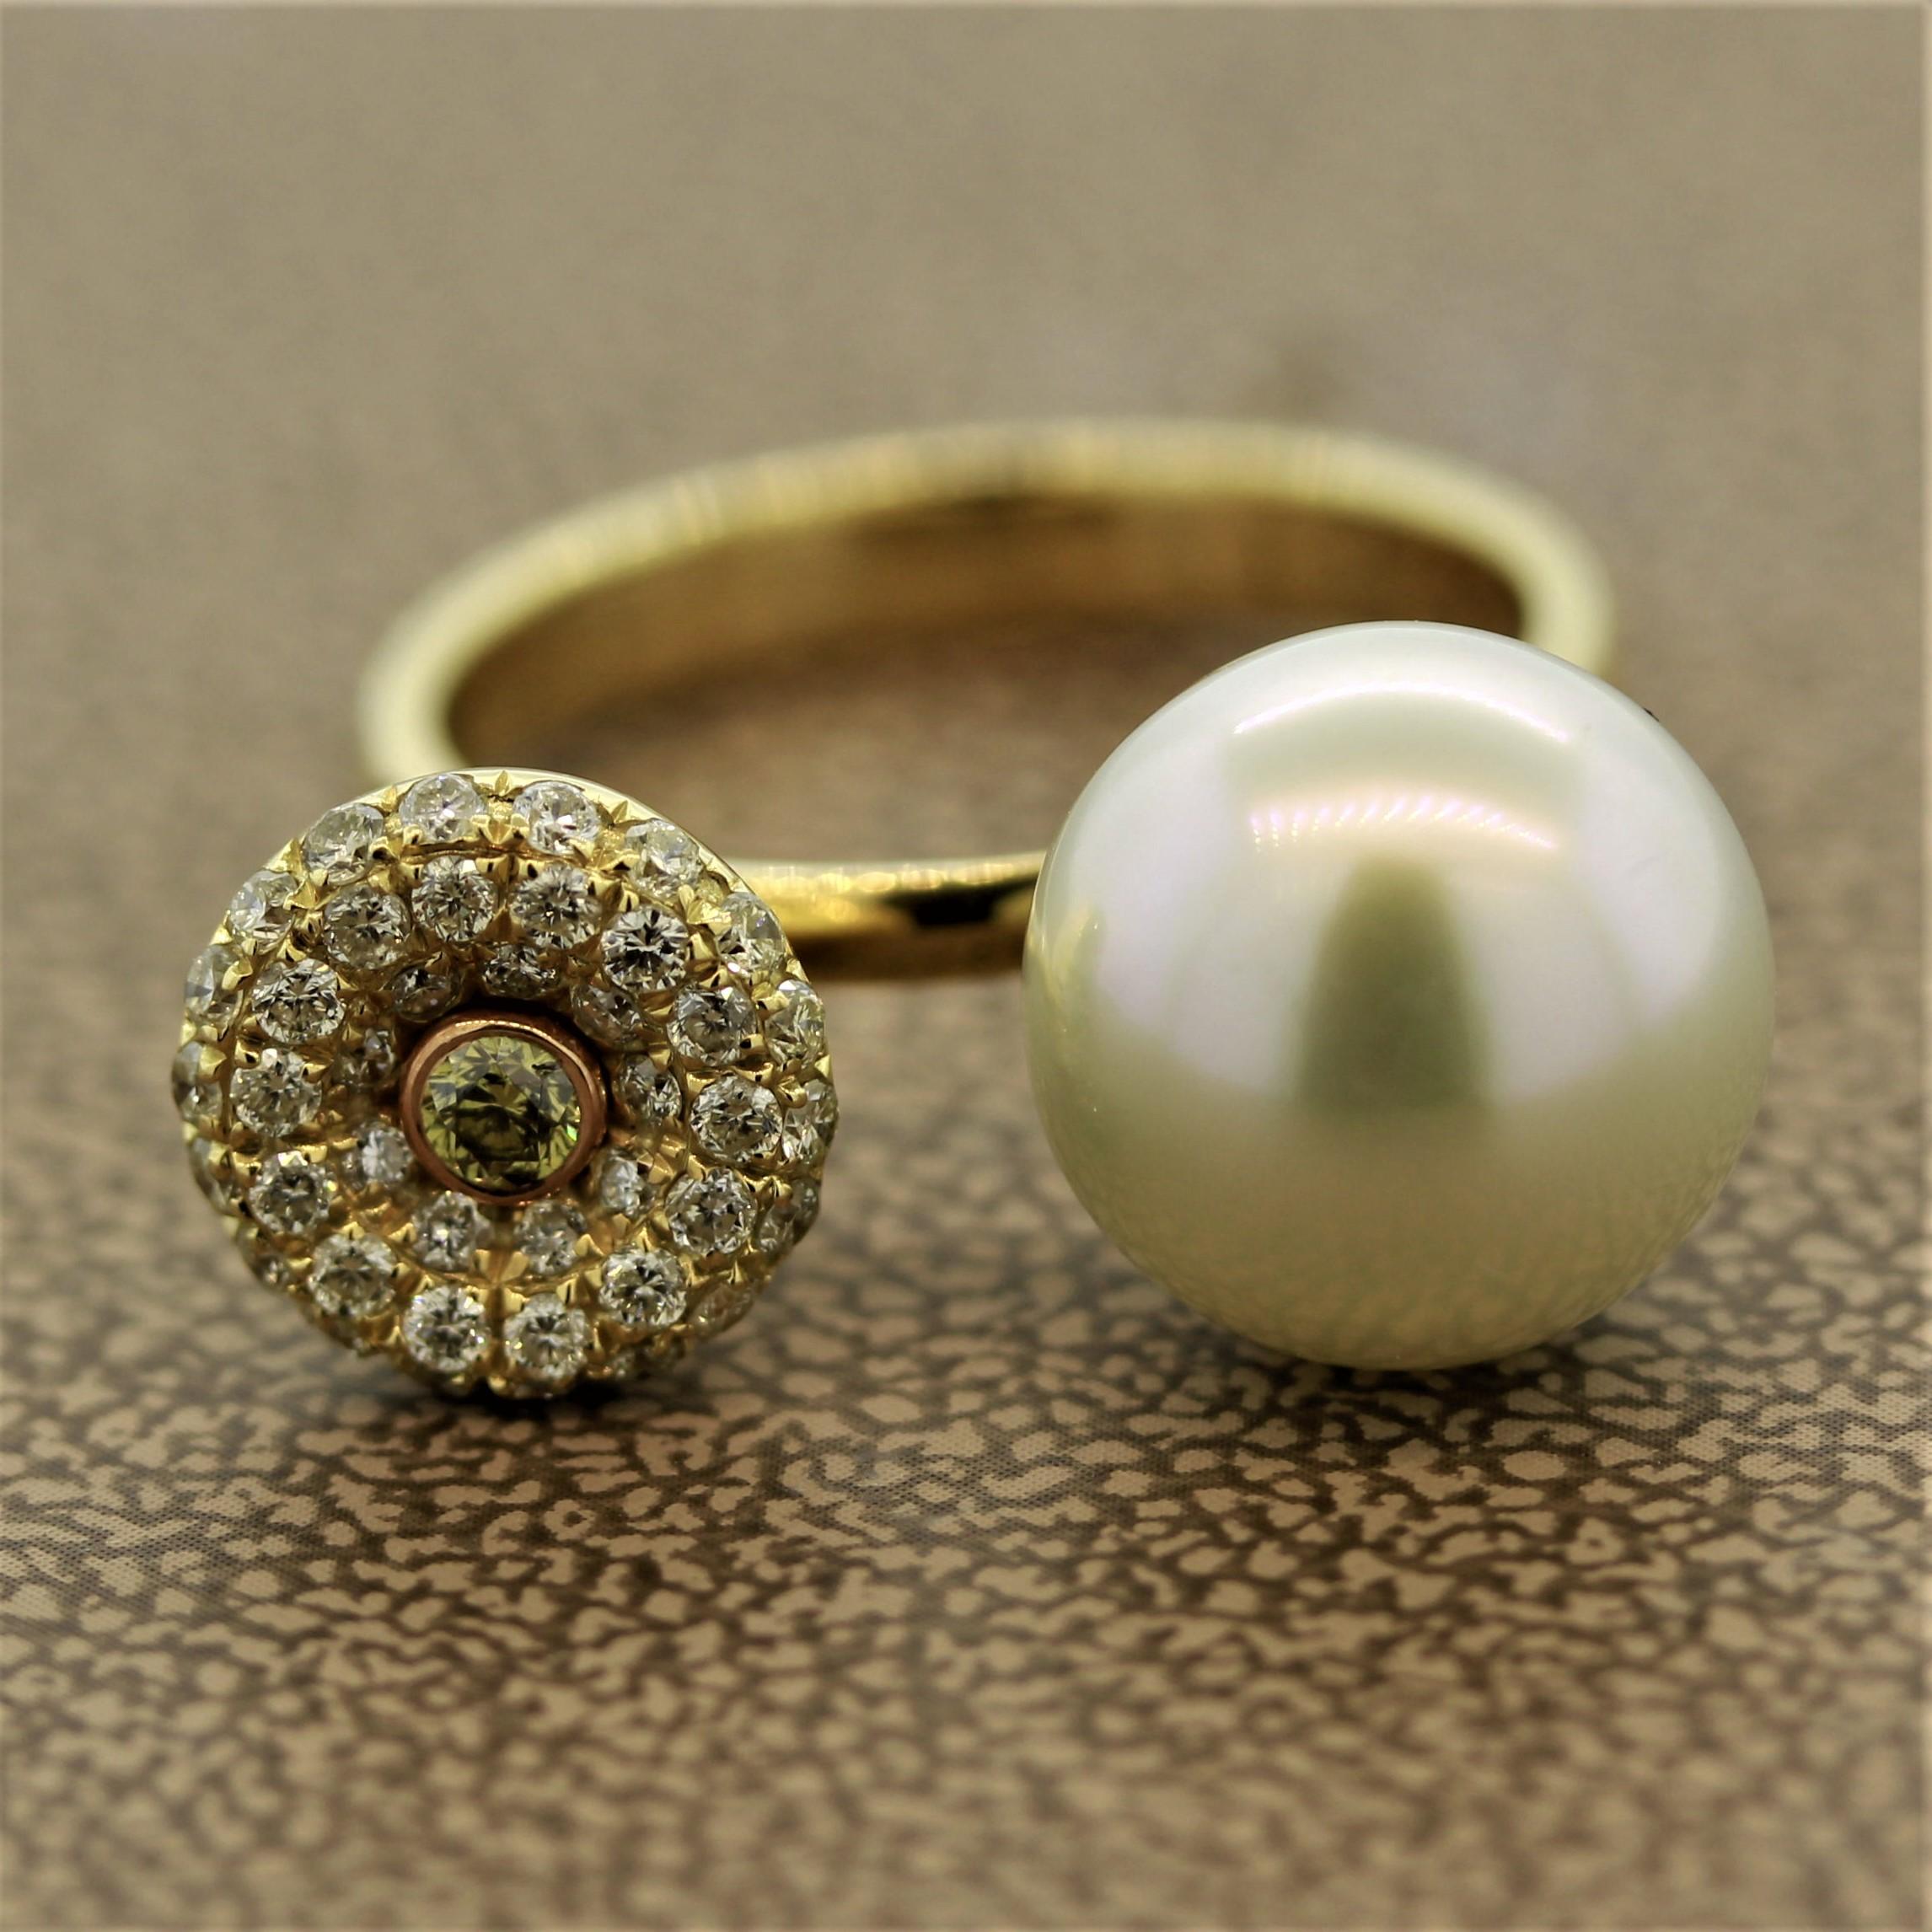 A unique ring featuring a South Sea pearl and fancy colored diamonds. The pearl has a full plump shape with an excellent luster and soft pink overtone. On the other side are 0.69 carats of white and fancy green colored diamond set in 18k yellow